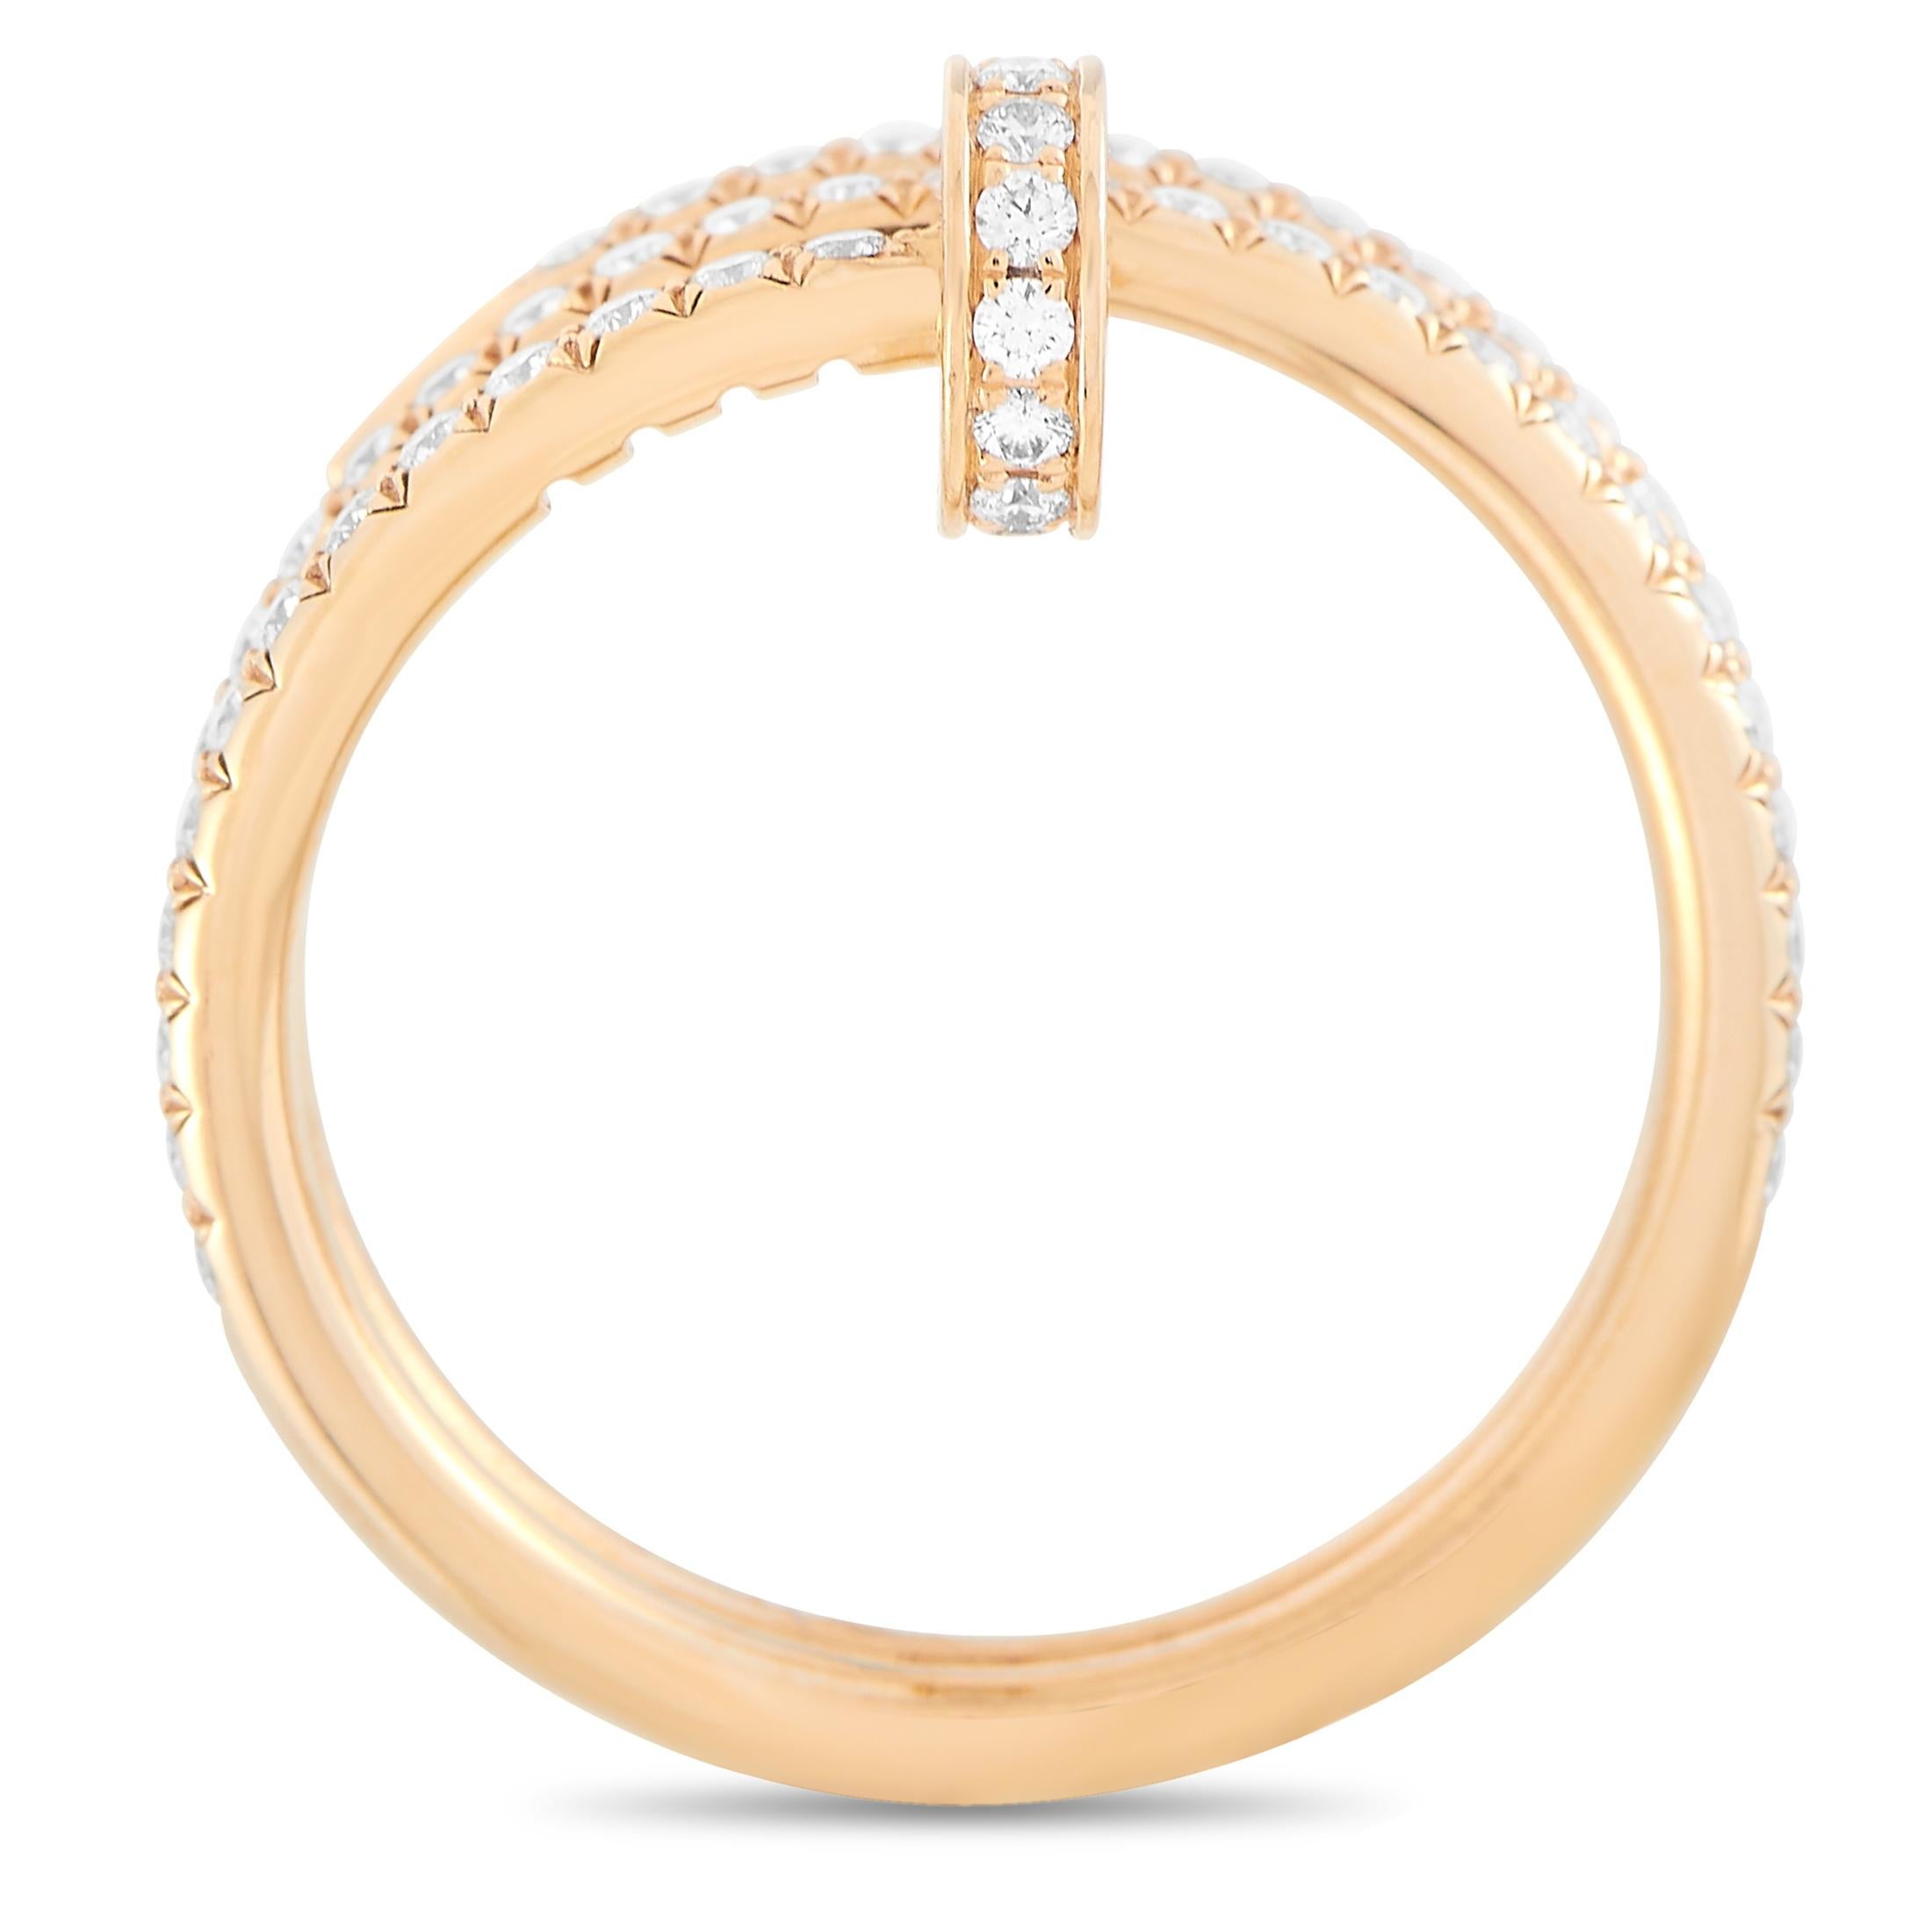 This Cartier Juste Un Clou is an elevated take on one of the luxury brand’s most iconic designs. Adorned with glittering round-cut diamonds, the classic nail shape radiates elegance thanks to the shimmering 18K Rose Gold setting. A breathtaking